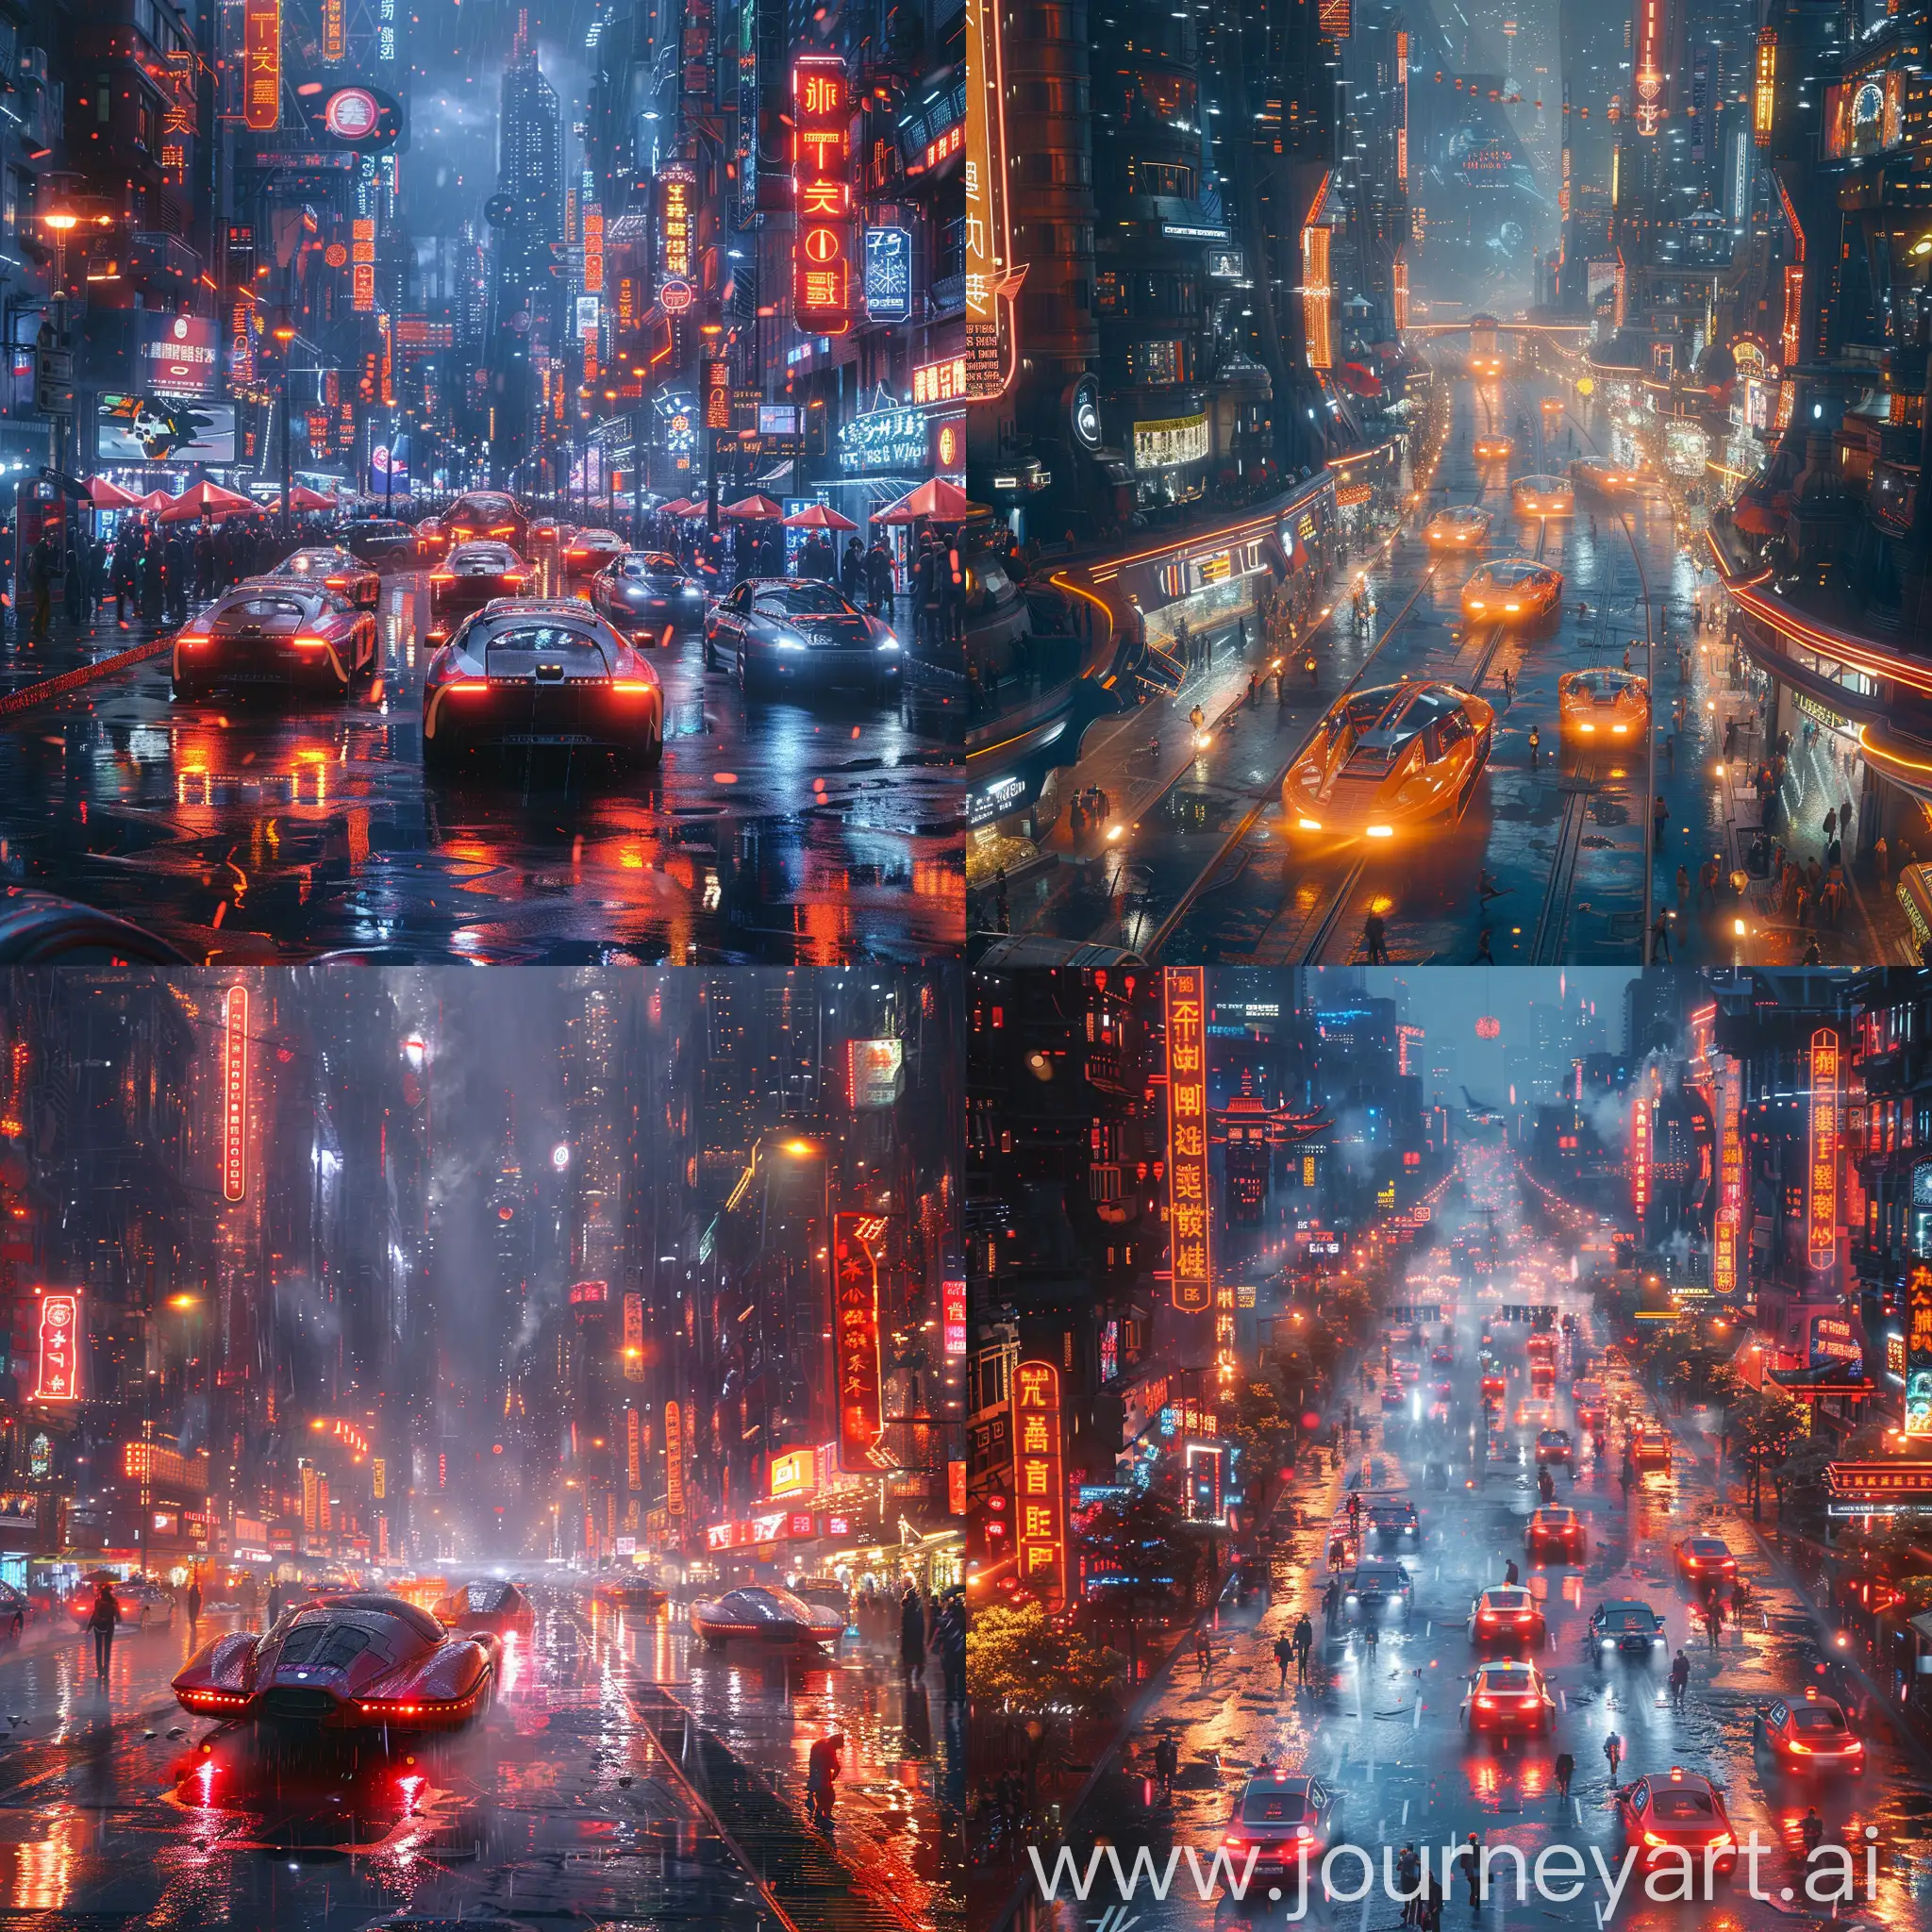 Futuristic-Utopian-Moscow-Holographic-Skyscrapers-and-Neonlit-Streets